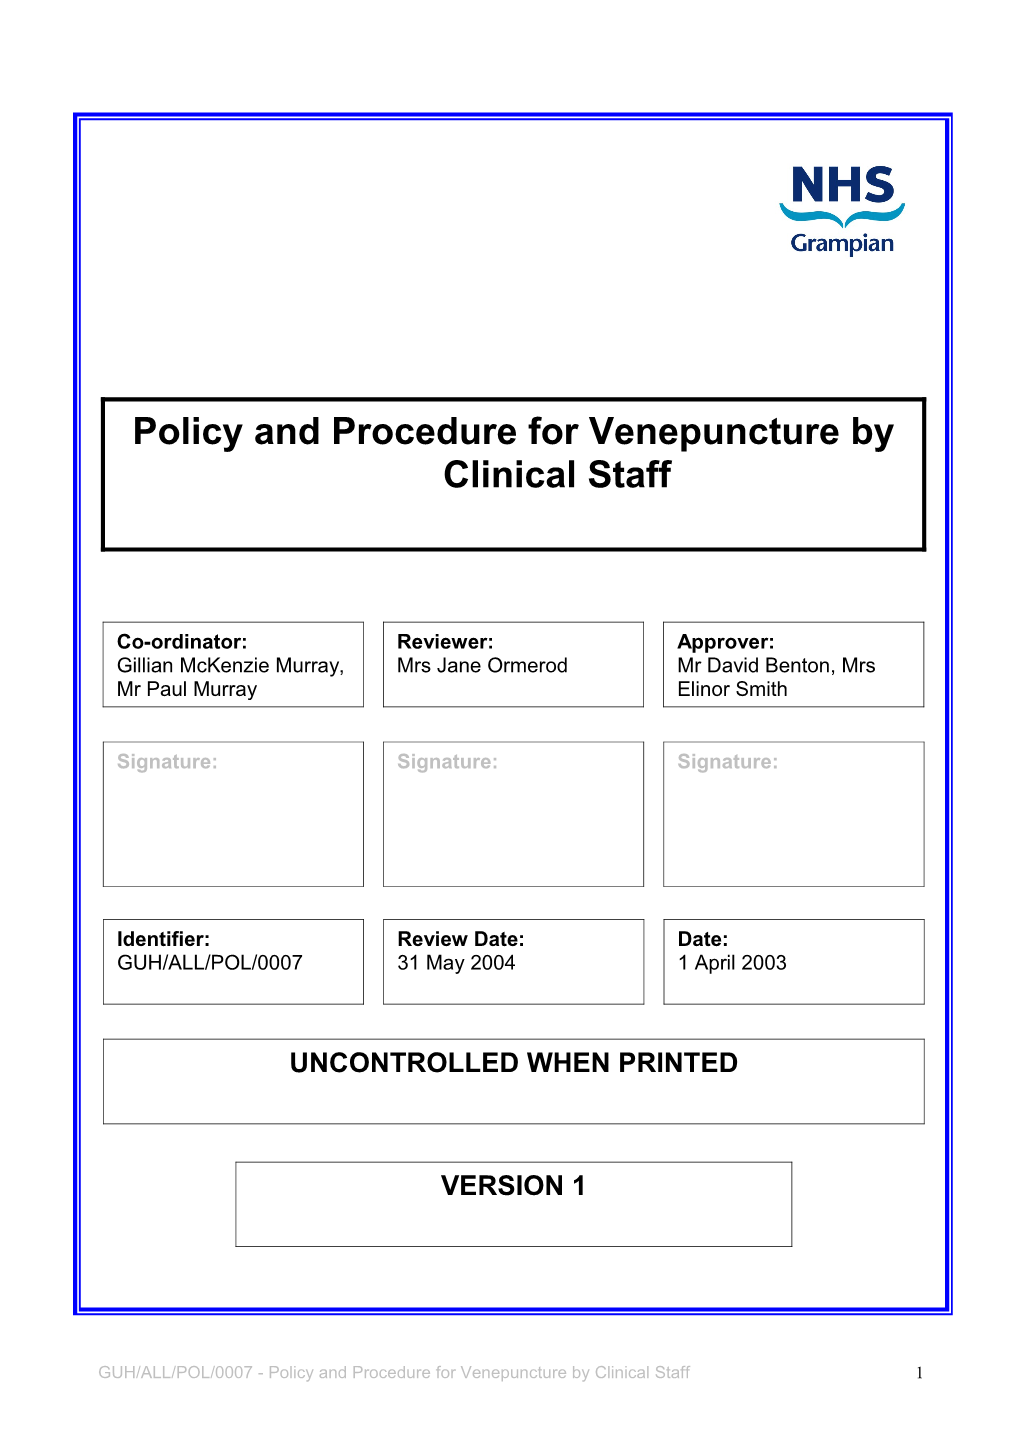 Policy and Procedure for Venepuncture by Clinical Staff